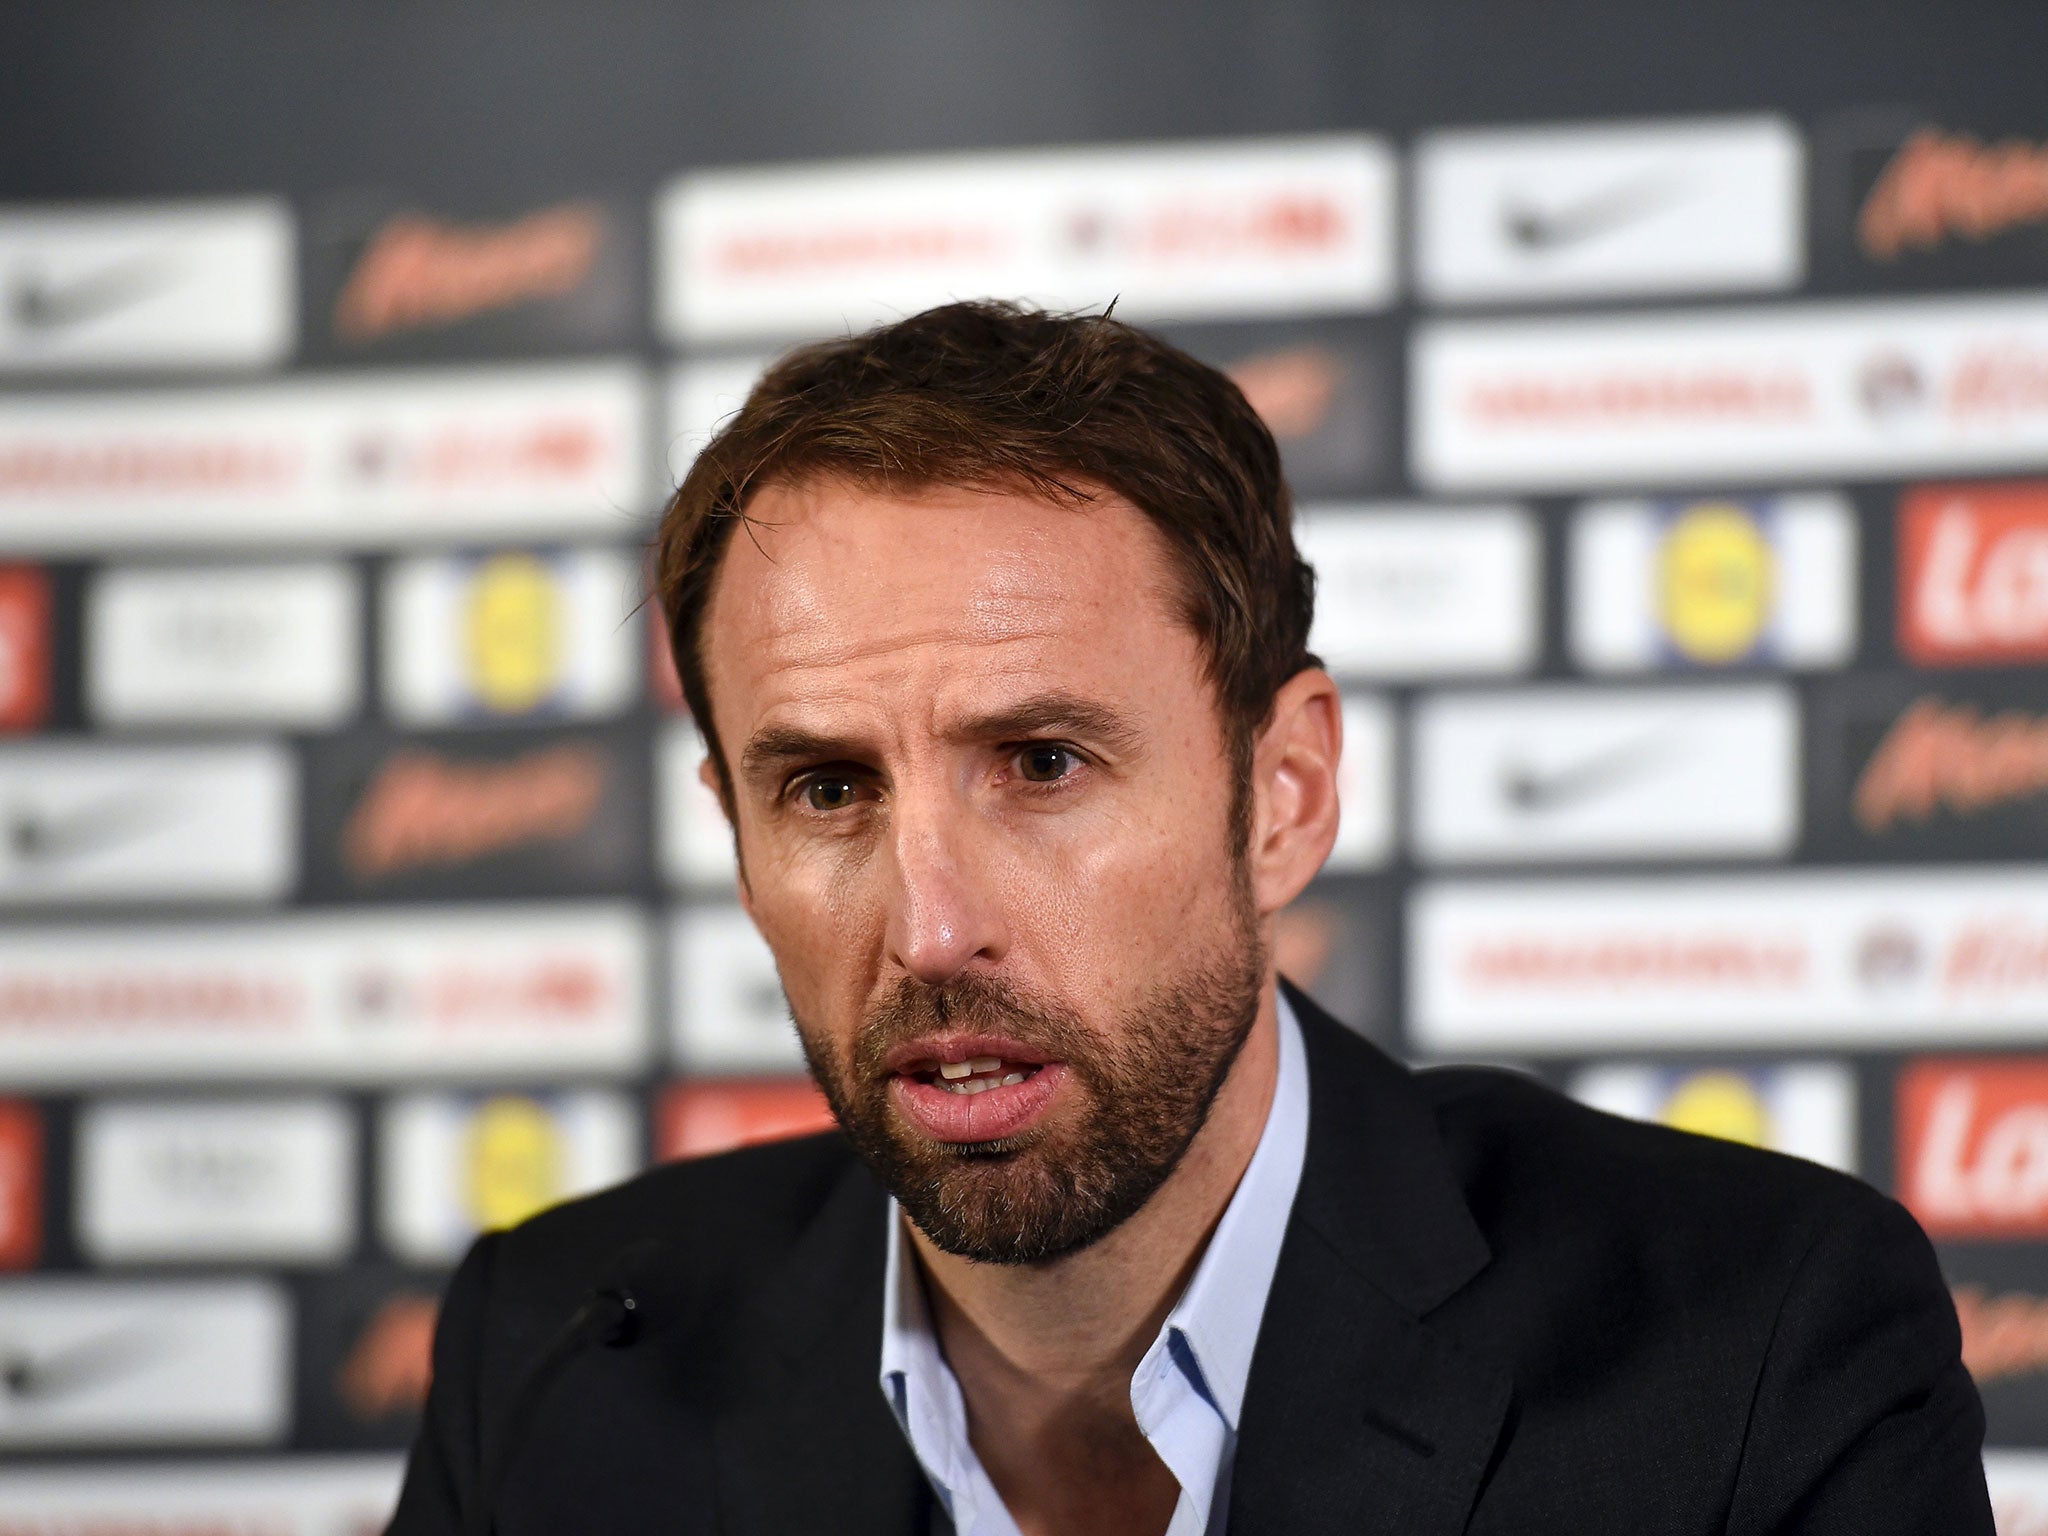 Gareth Southgate speaking at his first press conference as England manager